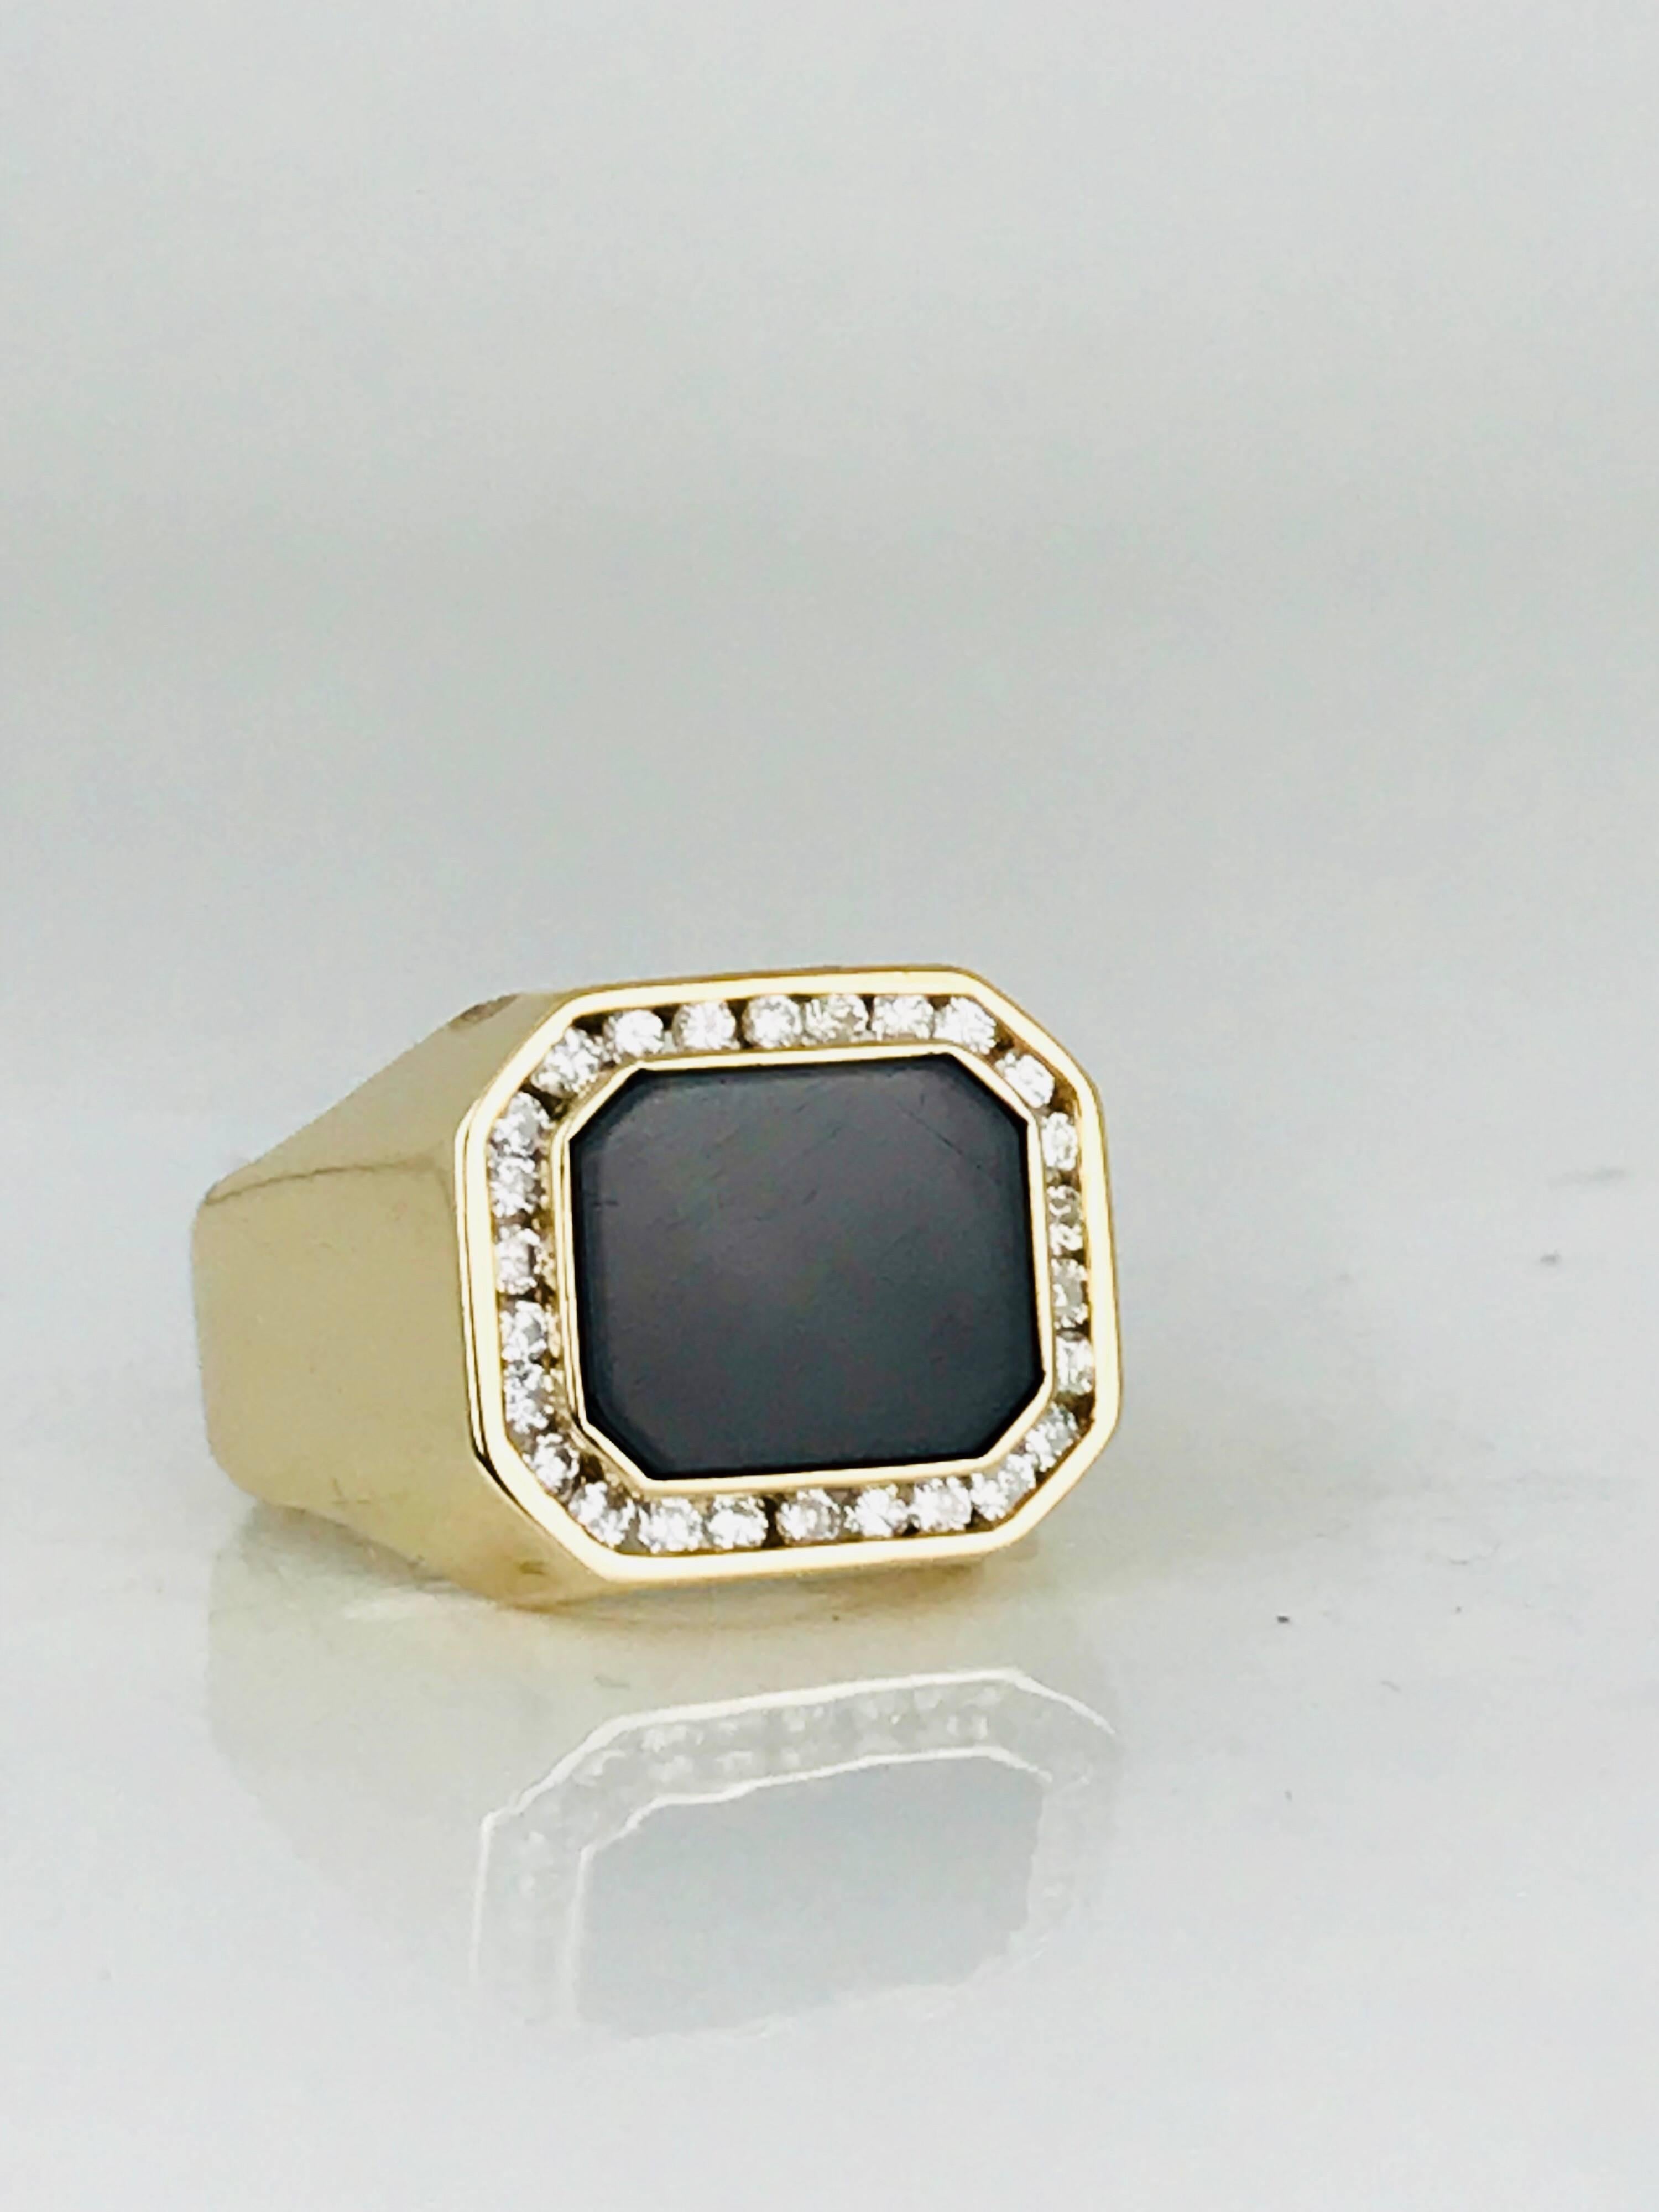 Retro Black Onyx, Channel-Set Diamonds, Yellow Gold Ring features a flat polished black onyx stone surrounded by round brilliant channel-set diamonds in 14 karat yellow gold.  The shape is a cut-corner rectangle.

26 round brilliant diamonds measure